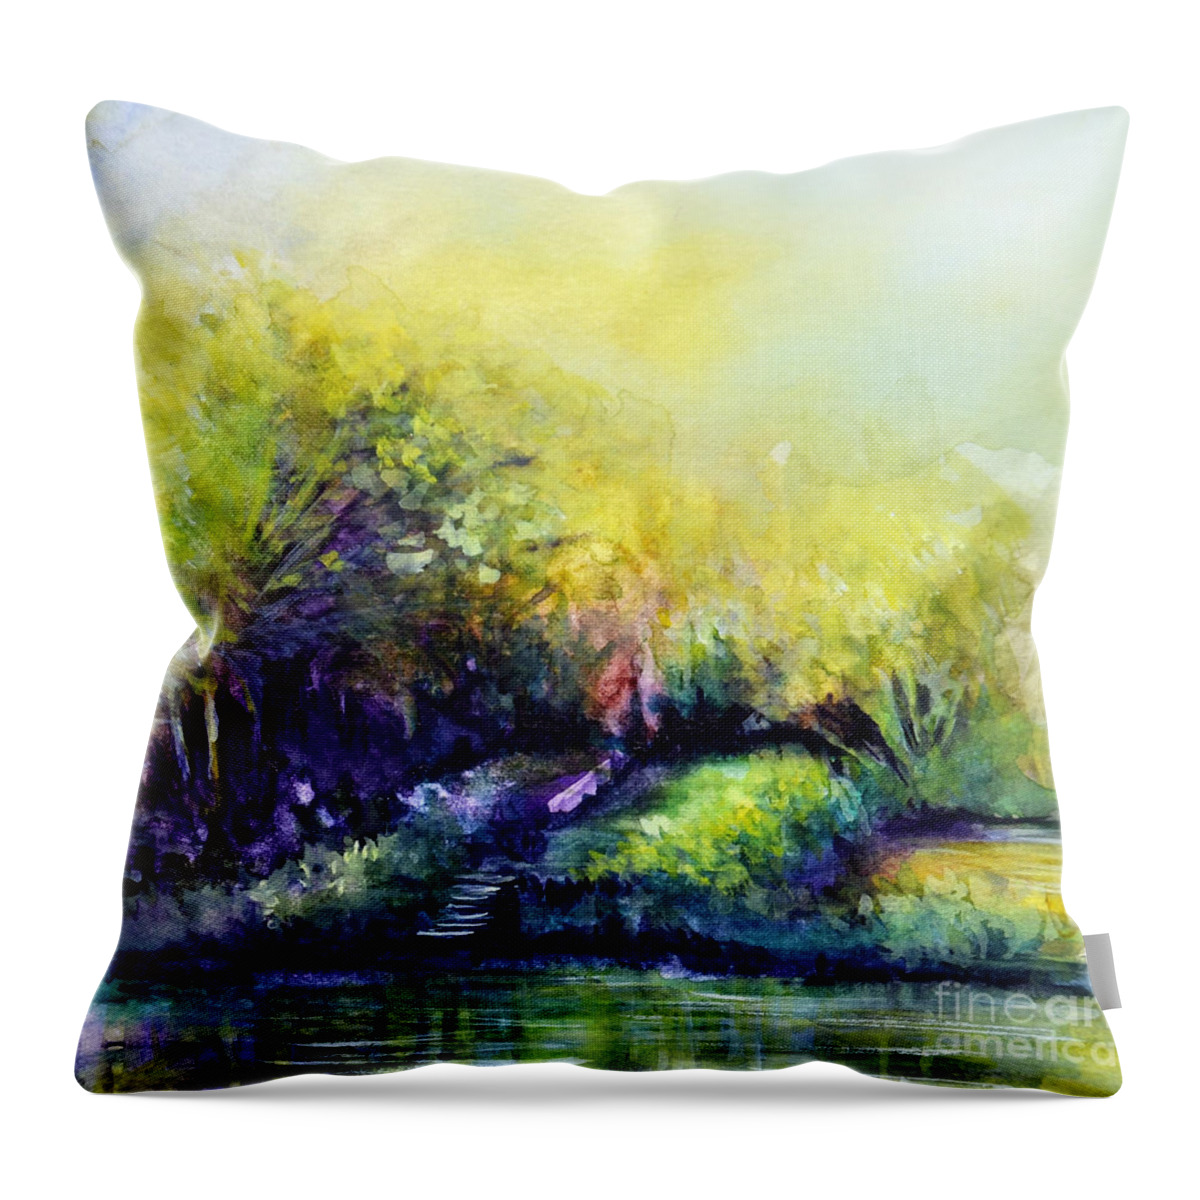 Water Throw Pillow featuring the painting In Dreams by Allison Ashton